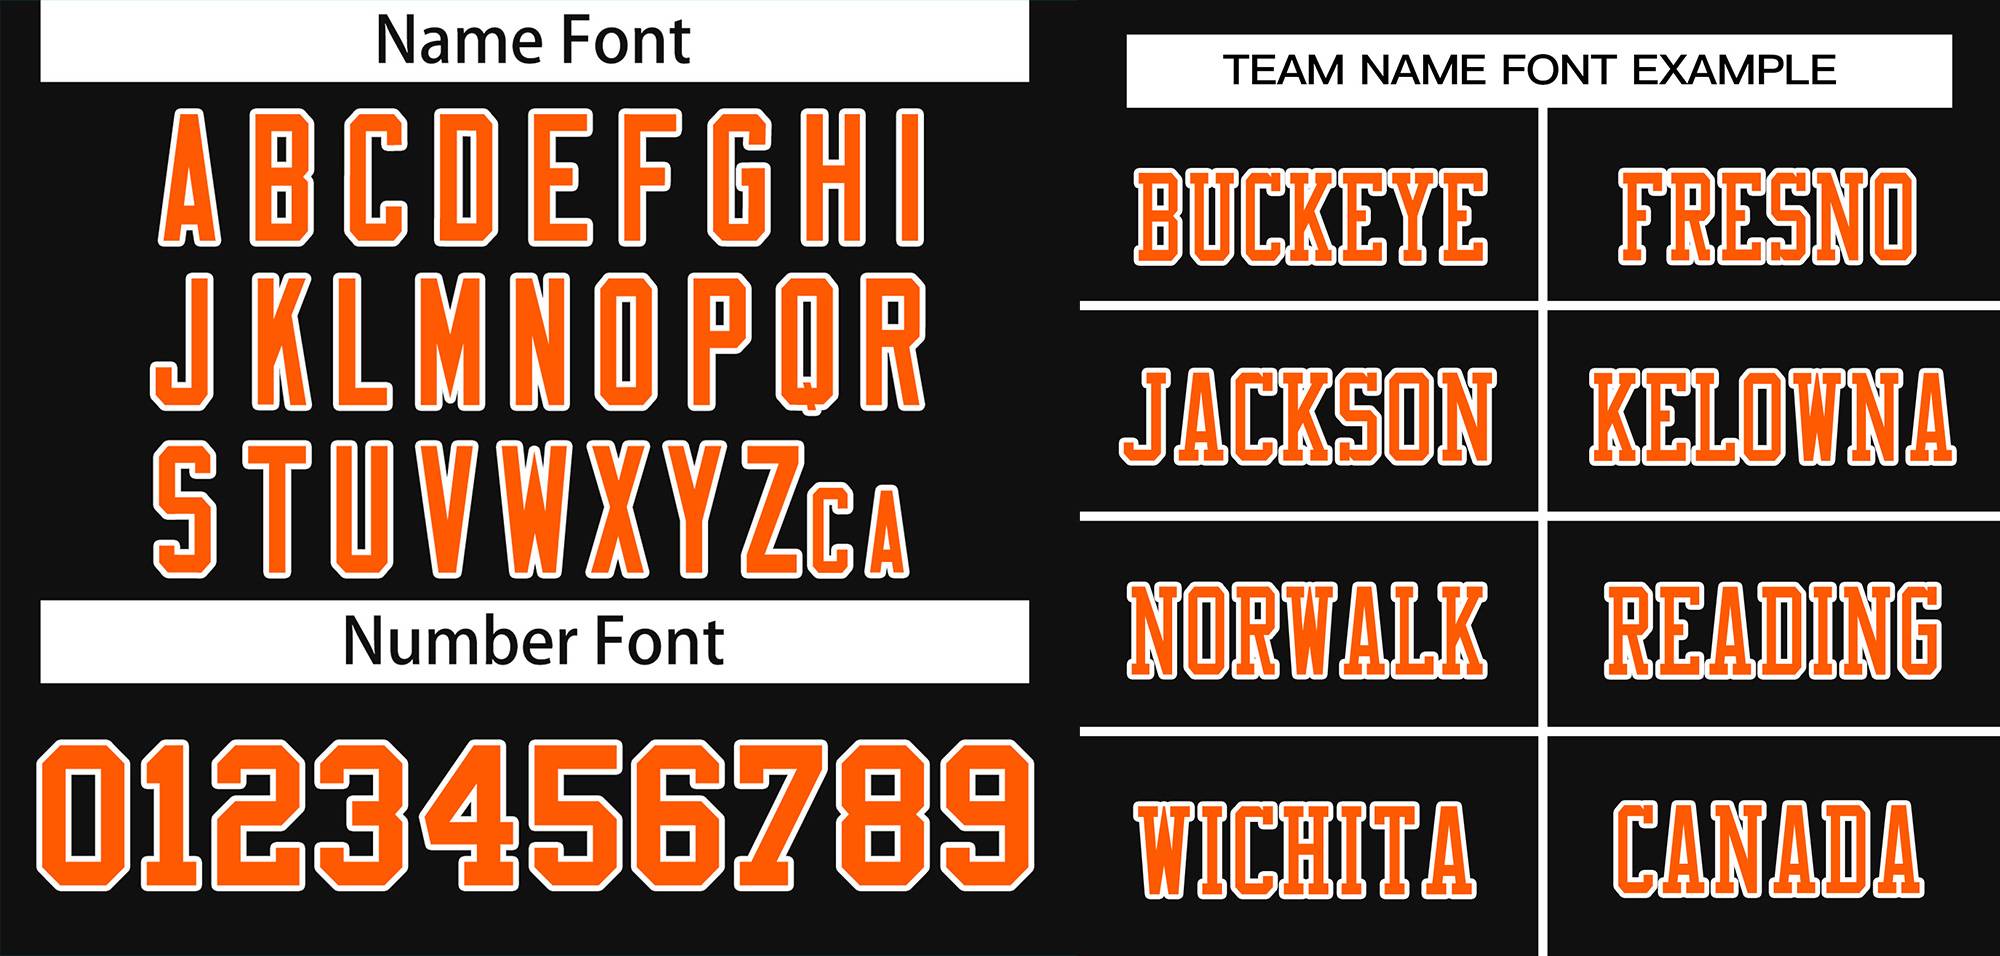 youth football jerseys name and number font example